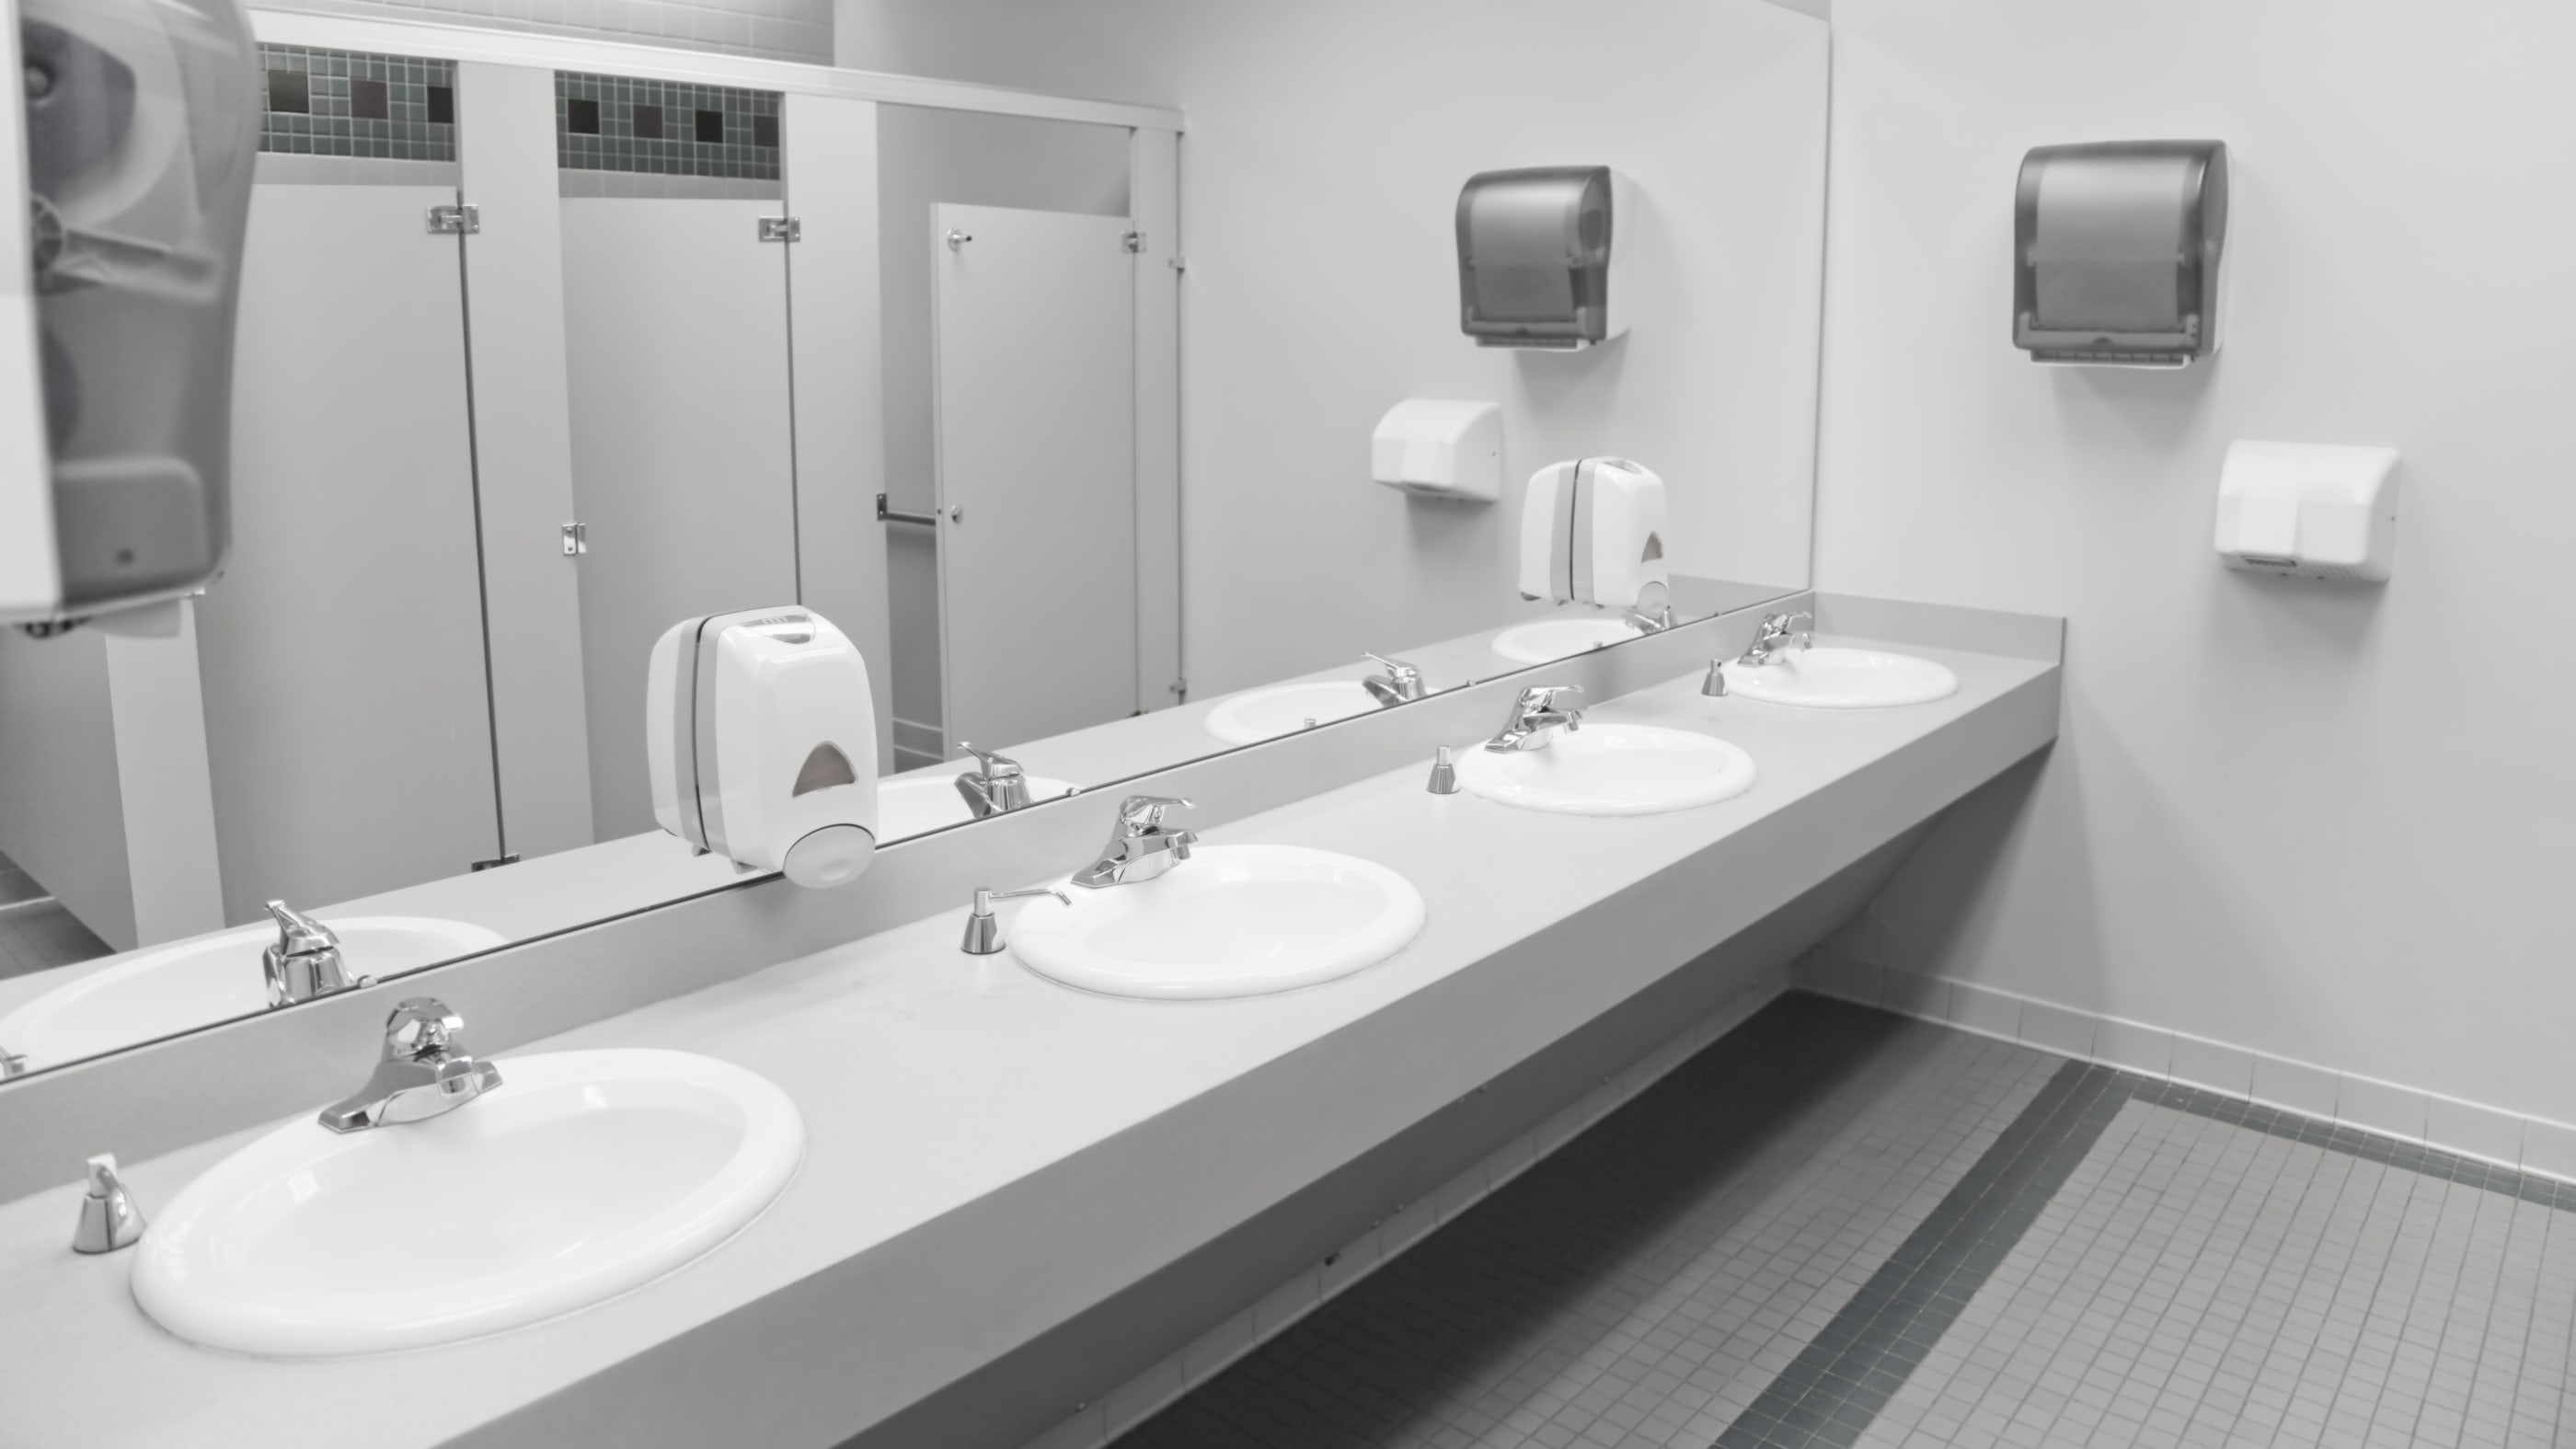 WiCi Concept : the press about the toilets with wash basin